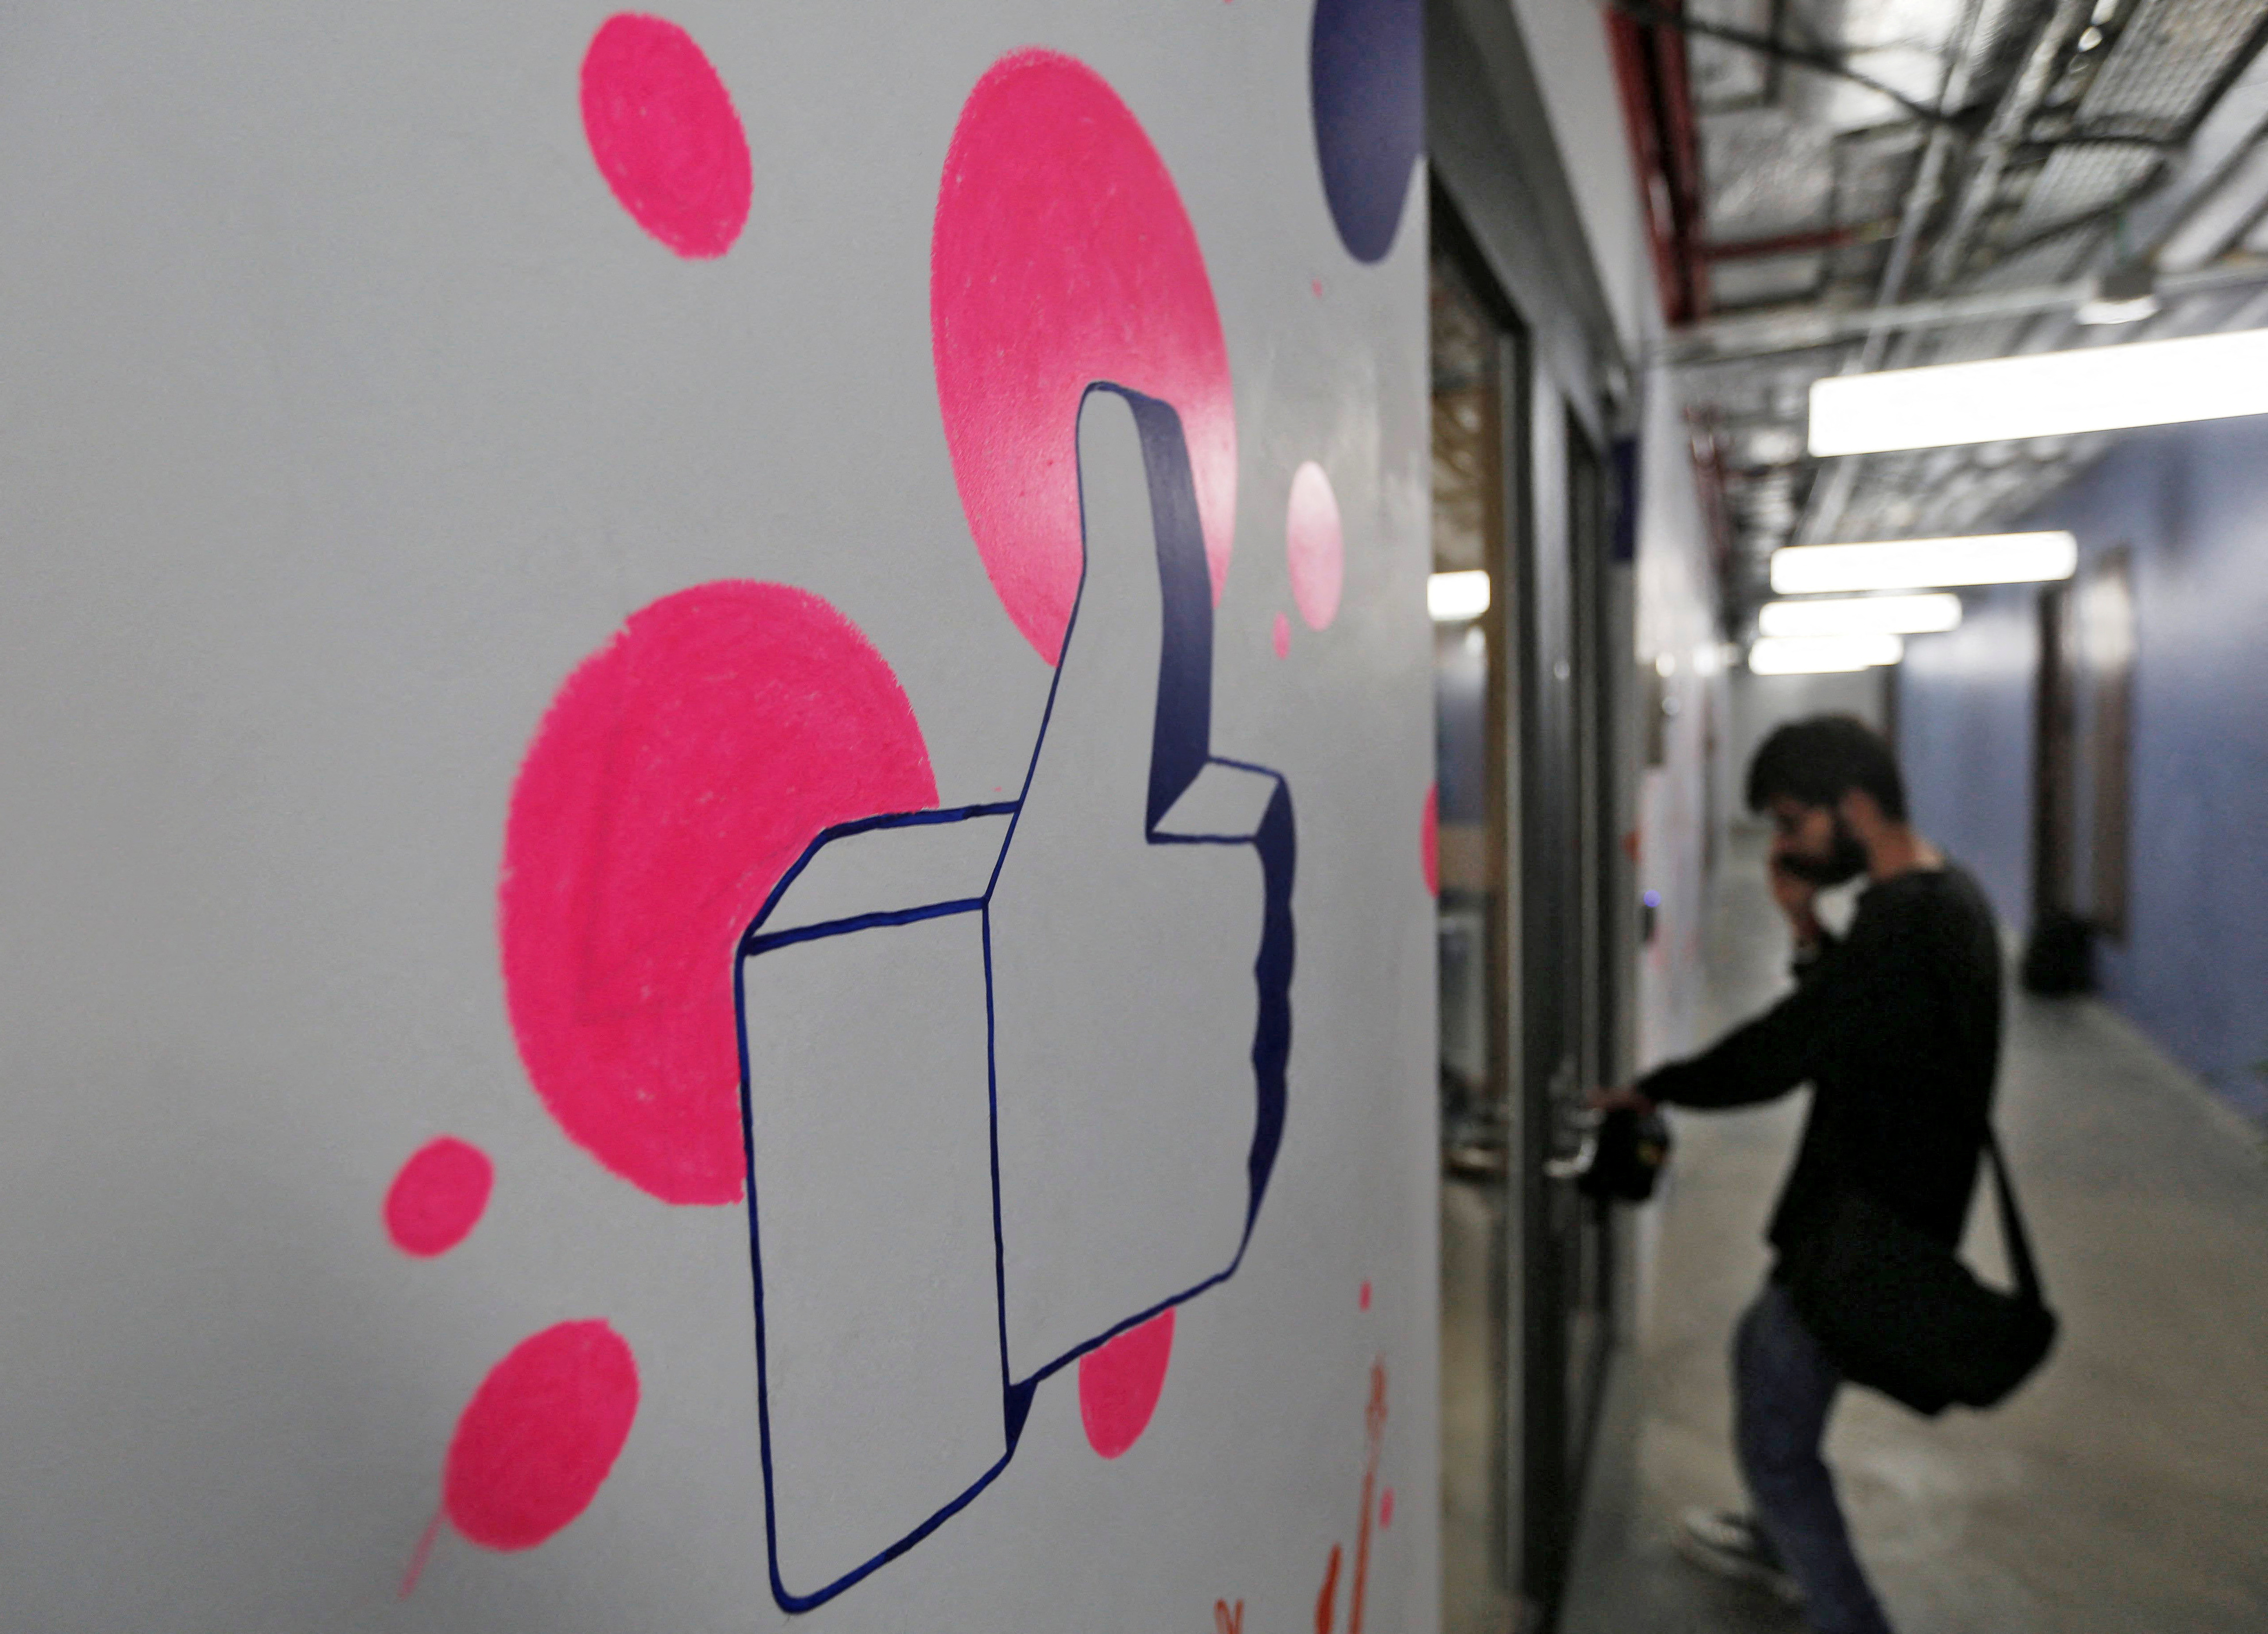 A man enters Facebook's new office in Mumbai